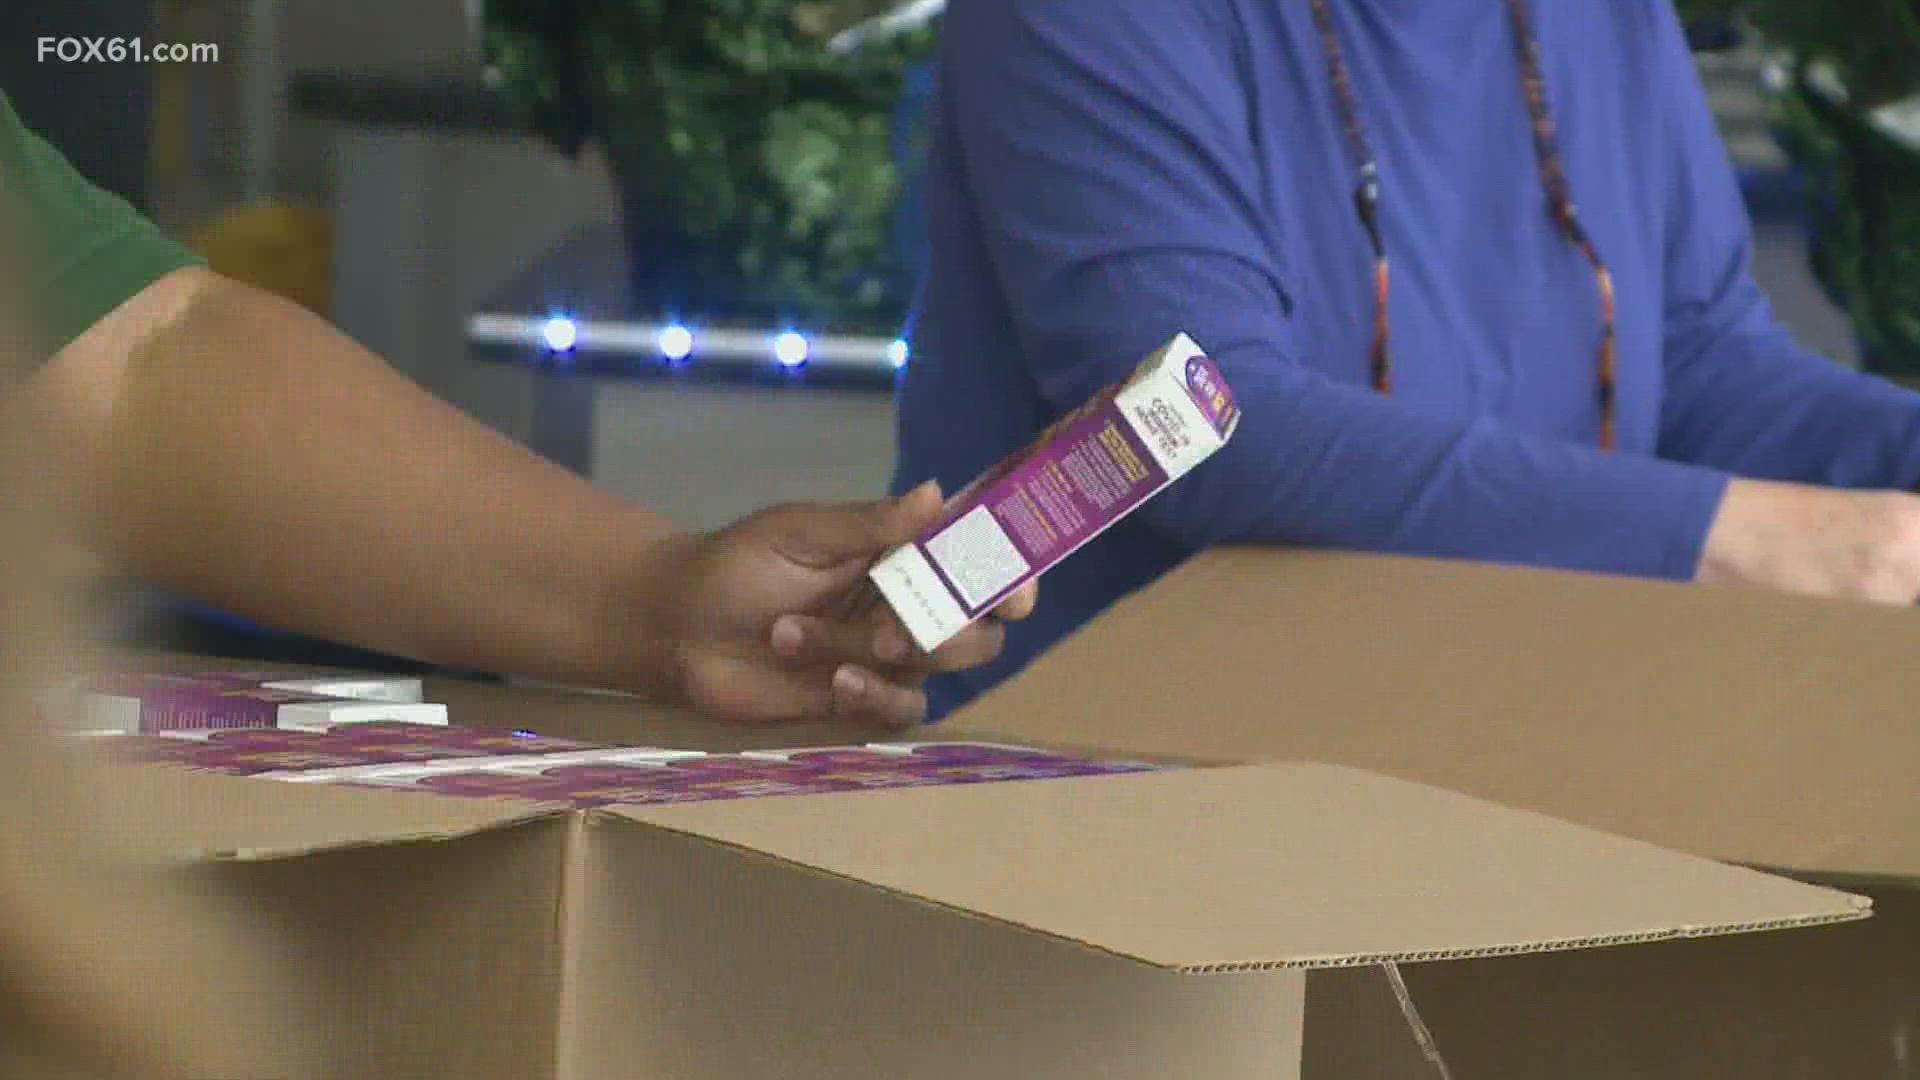 Other municipalities around the state were forced to delay their distribution events Thursday after there was a delay in the shipments of kits.